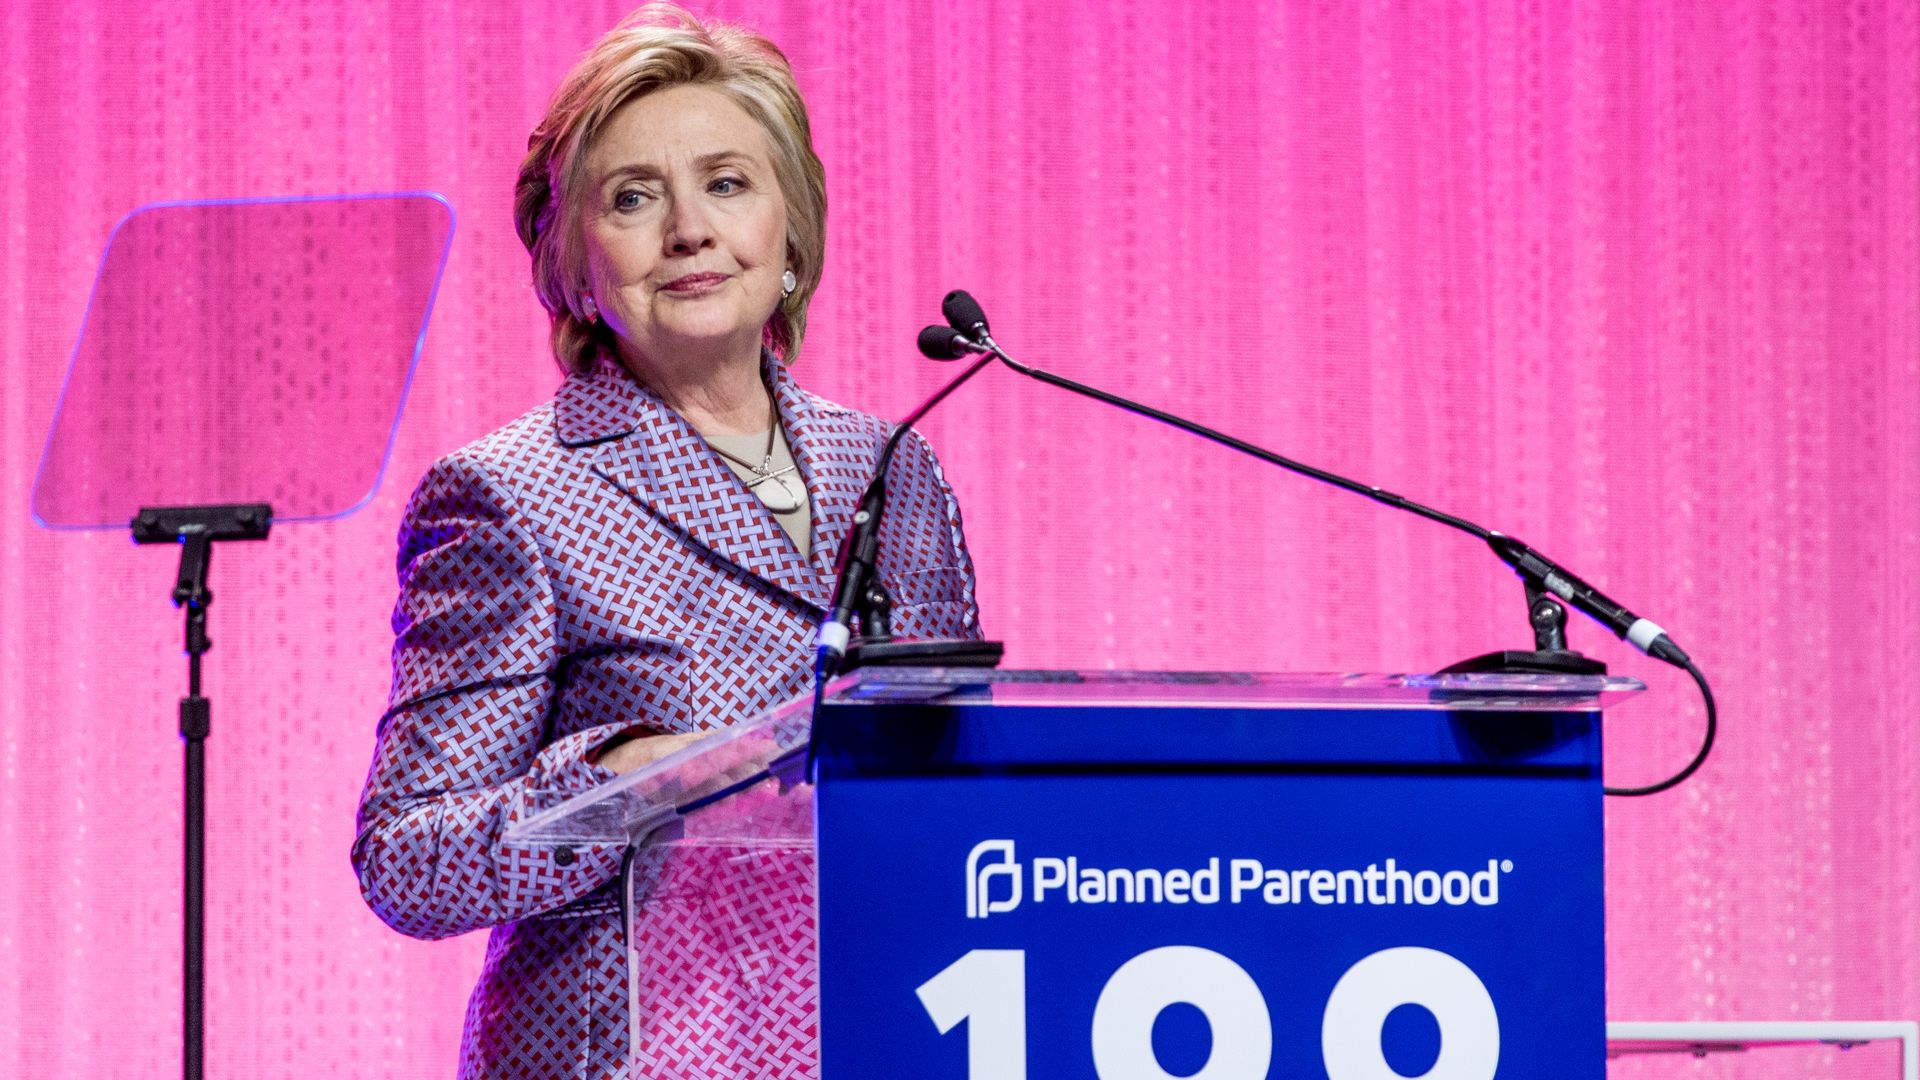 Presidential nominee Hillary Clinton speaks during the Planned Parenthood 100th Anniversary Gala.